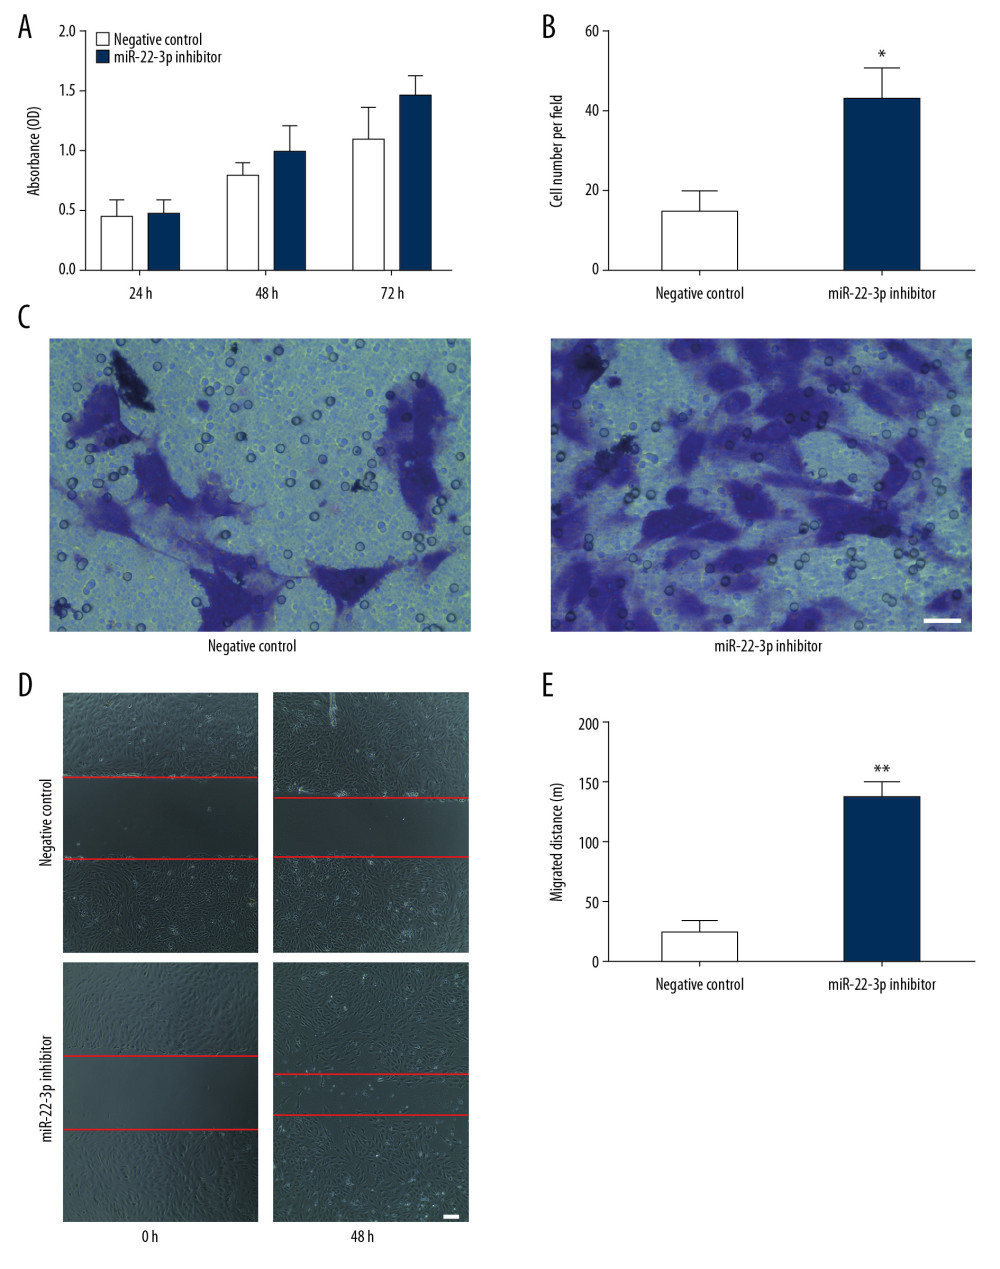 Effect of miR-22-3p on the biological function of endothelial progenitor cells (EPCs). (A) Proliferation assay showing knockdown of miR-22-3p promoted cell proliferation. (B) Statistical analysis of transwell assay revealed that inhibition of miR-22-3p increased migration of EPCs. (C) Representative microscopic images of cells that invaded through the transwell. (D) EPCs transfected with miR-22-3p inhibitor showed more migrated distance. (E) Statistical results from wound-healing assay. * P<0.05; ** P<0.01.